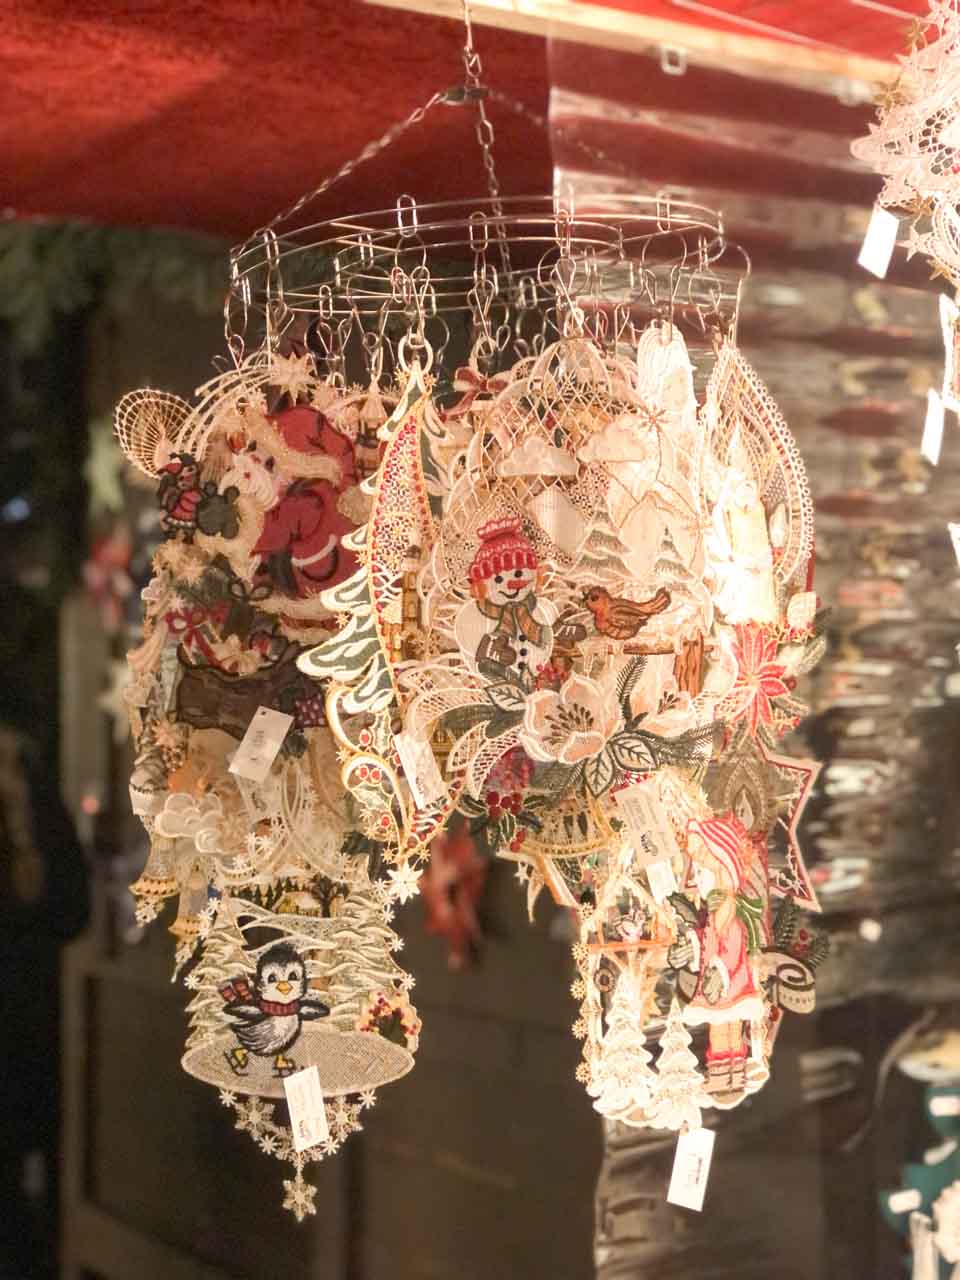 Elegant lace Christmas decorations featuring angels and other festive motifs, delicately hanging at a Christkindlesmarkt stall